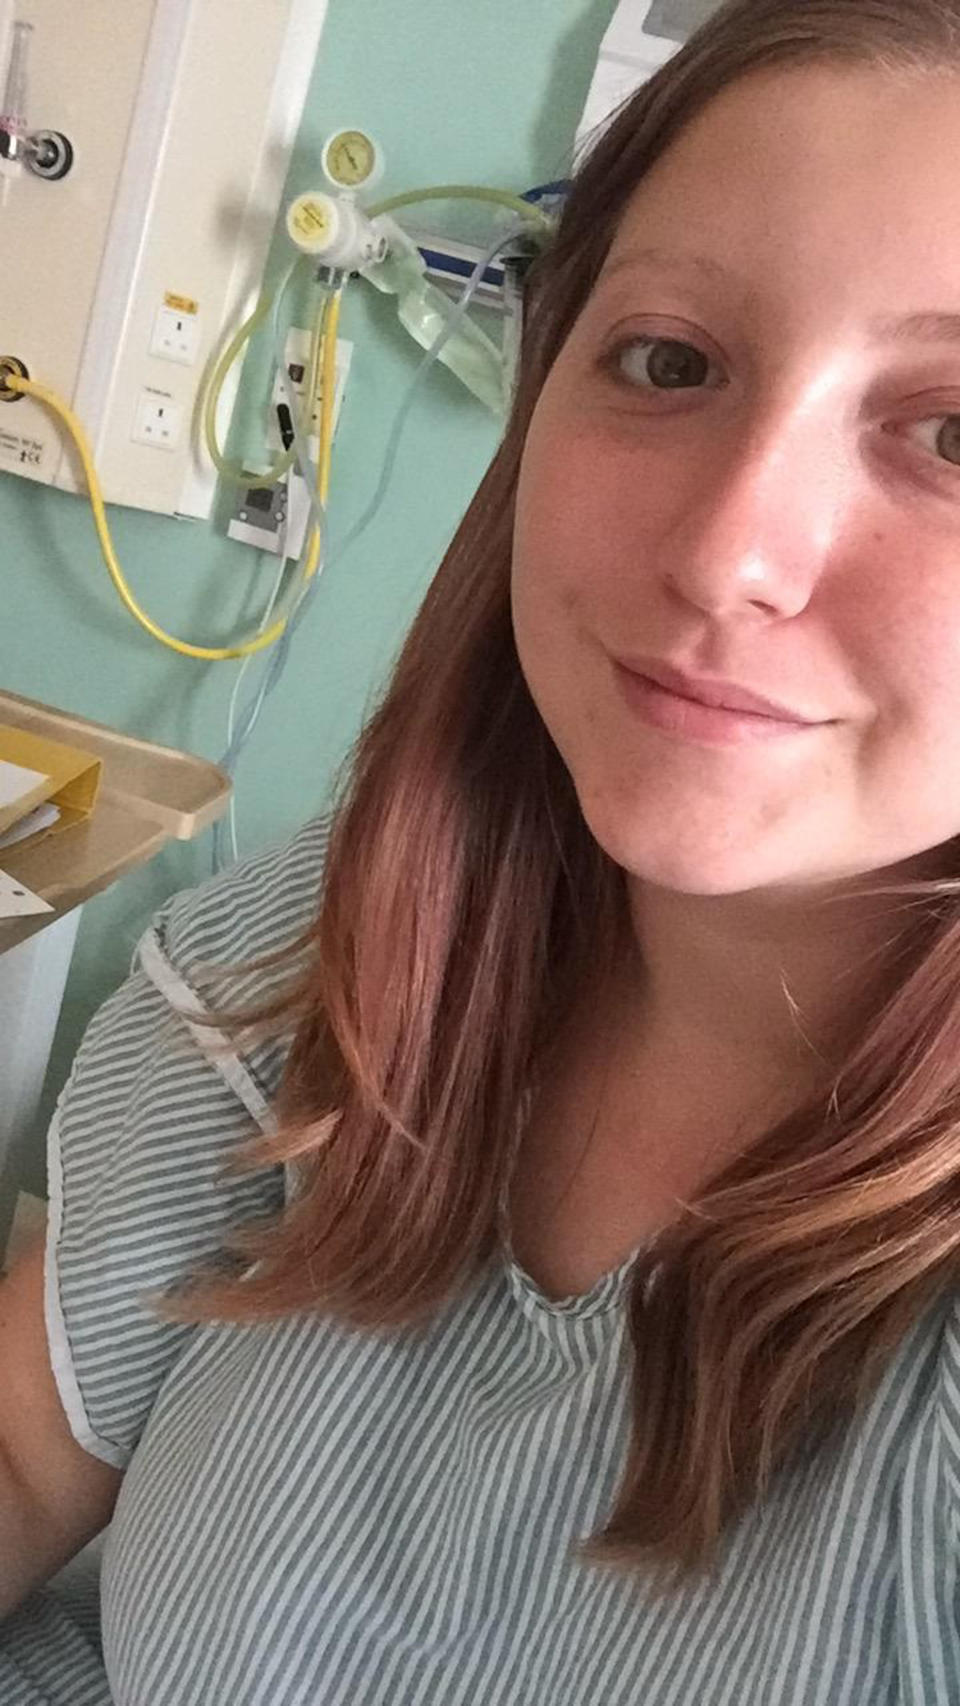 A 21-year-old woman goes through menopause after dealing with endometriosis 